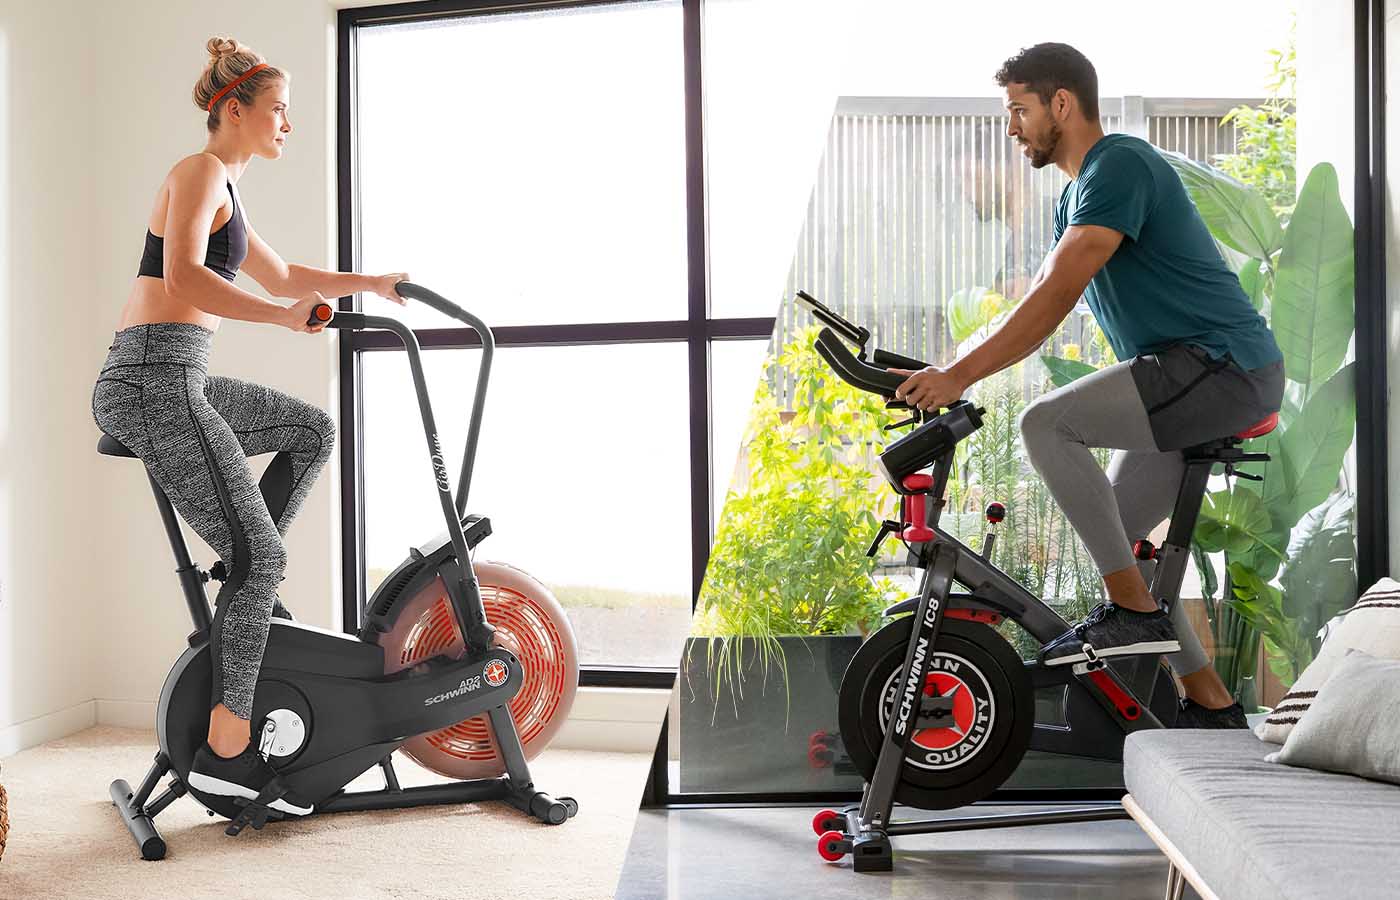 Buy Online Treadmills, Spin Bikes, Gym/Air Bikes For Home & Gym Use